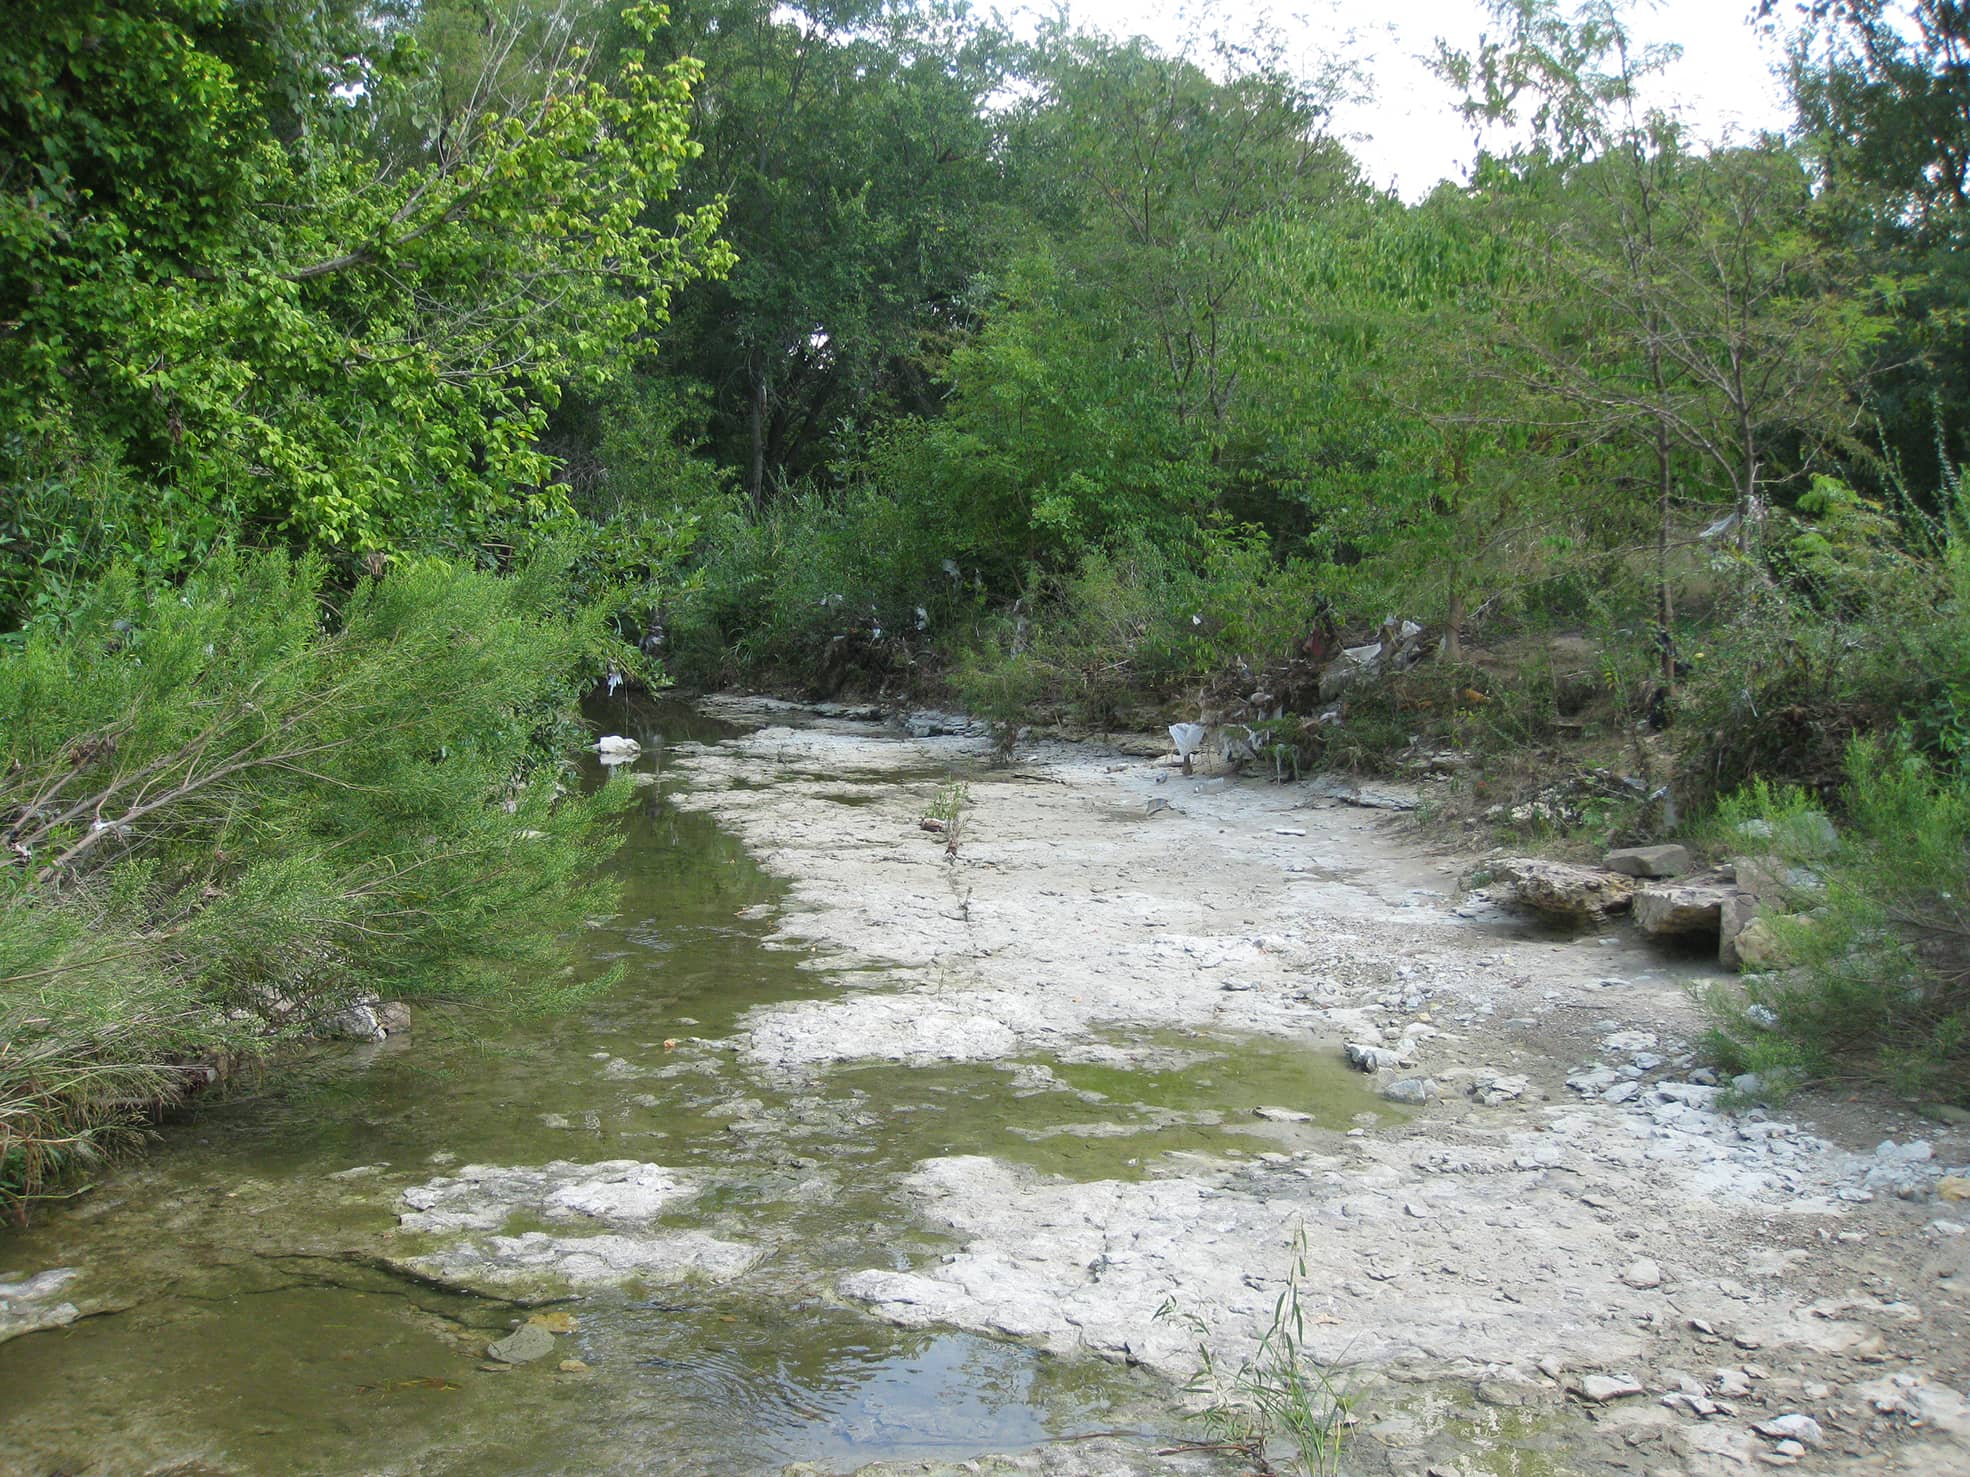 Kimley-Horn developed new hydrologic and hydraulic models (HEC-HMS and HEC-RAS) for the Dunbar Creek Watershed in Fort Worth, Texas.